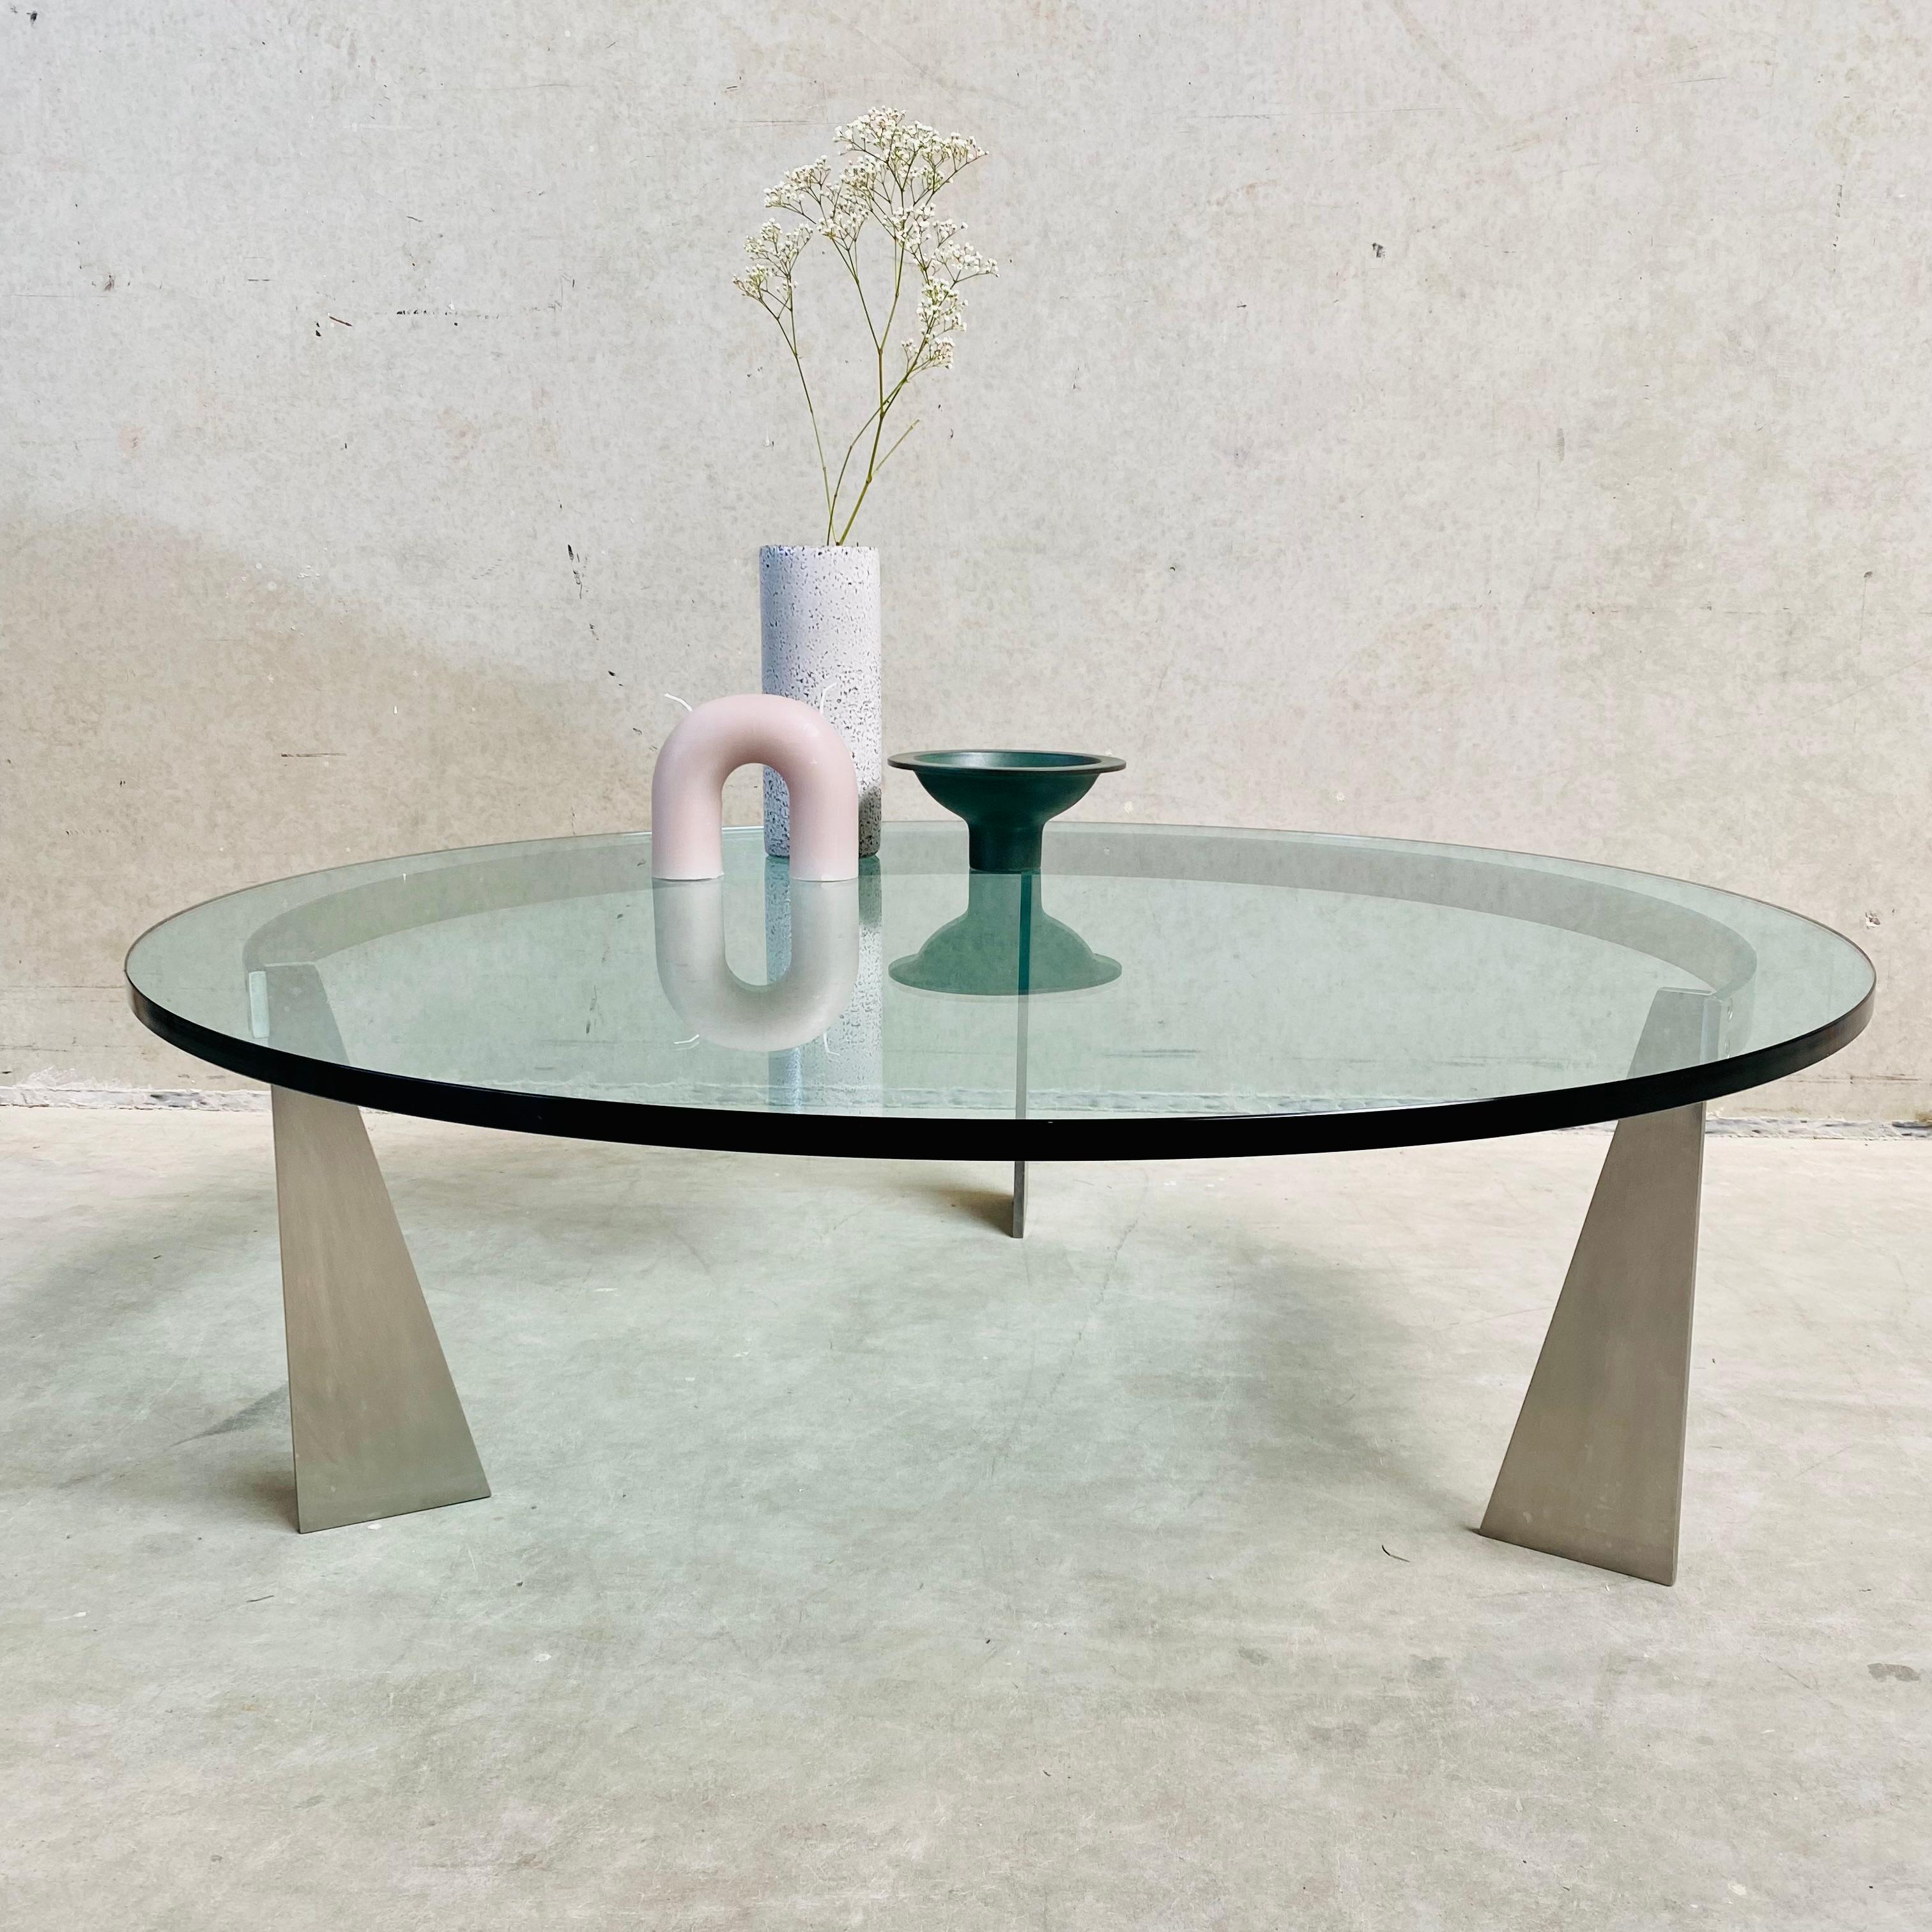 Introducing the Glass and RVS Coffee Table Model G3 by Just van Beek for Metaform: A Timeless Dutch Design Masterpiece

Discover the epitome of Dutch design excellence with the Glass and RVS Coffee Table Model G3, created by renowned designer Just